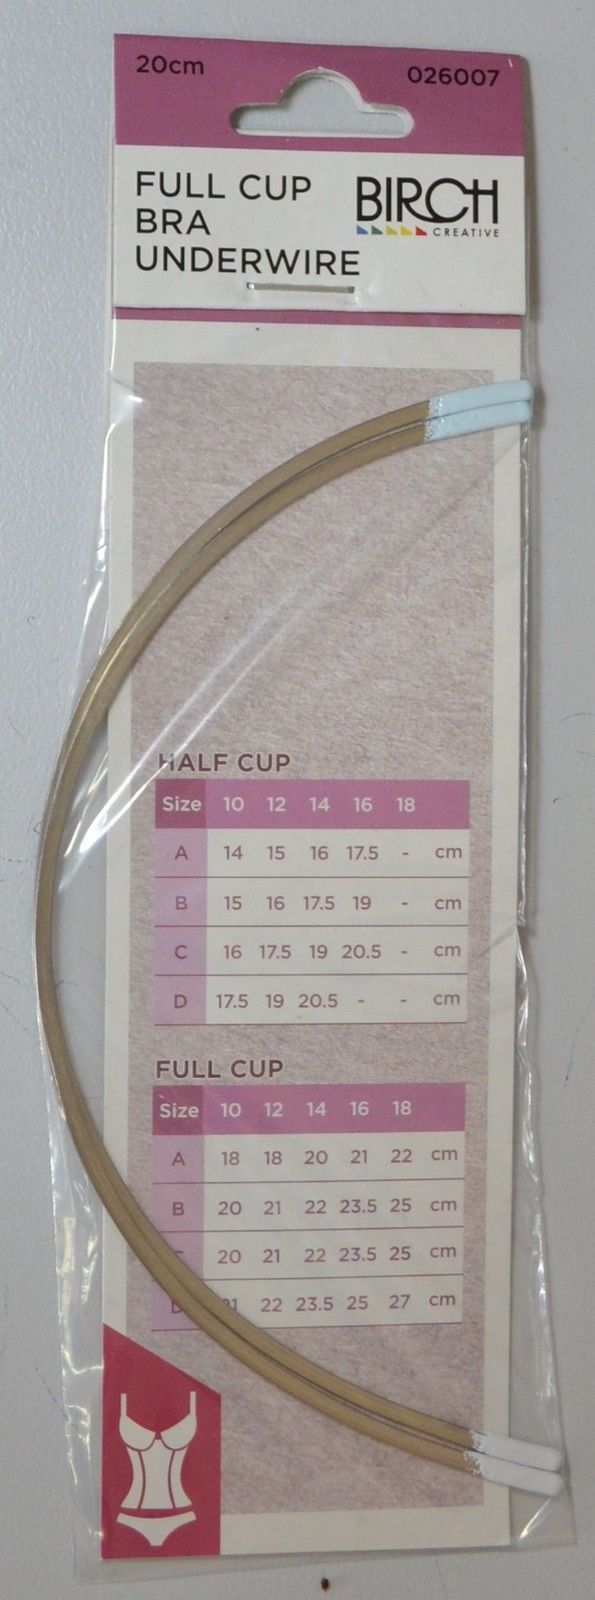 Bra Underwire, FULL CUP 20cm, 1 Pair, Under wire for bra Replacement, bra  making